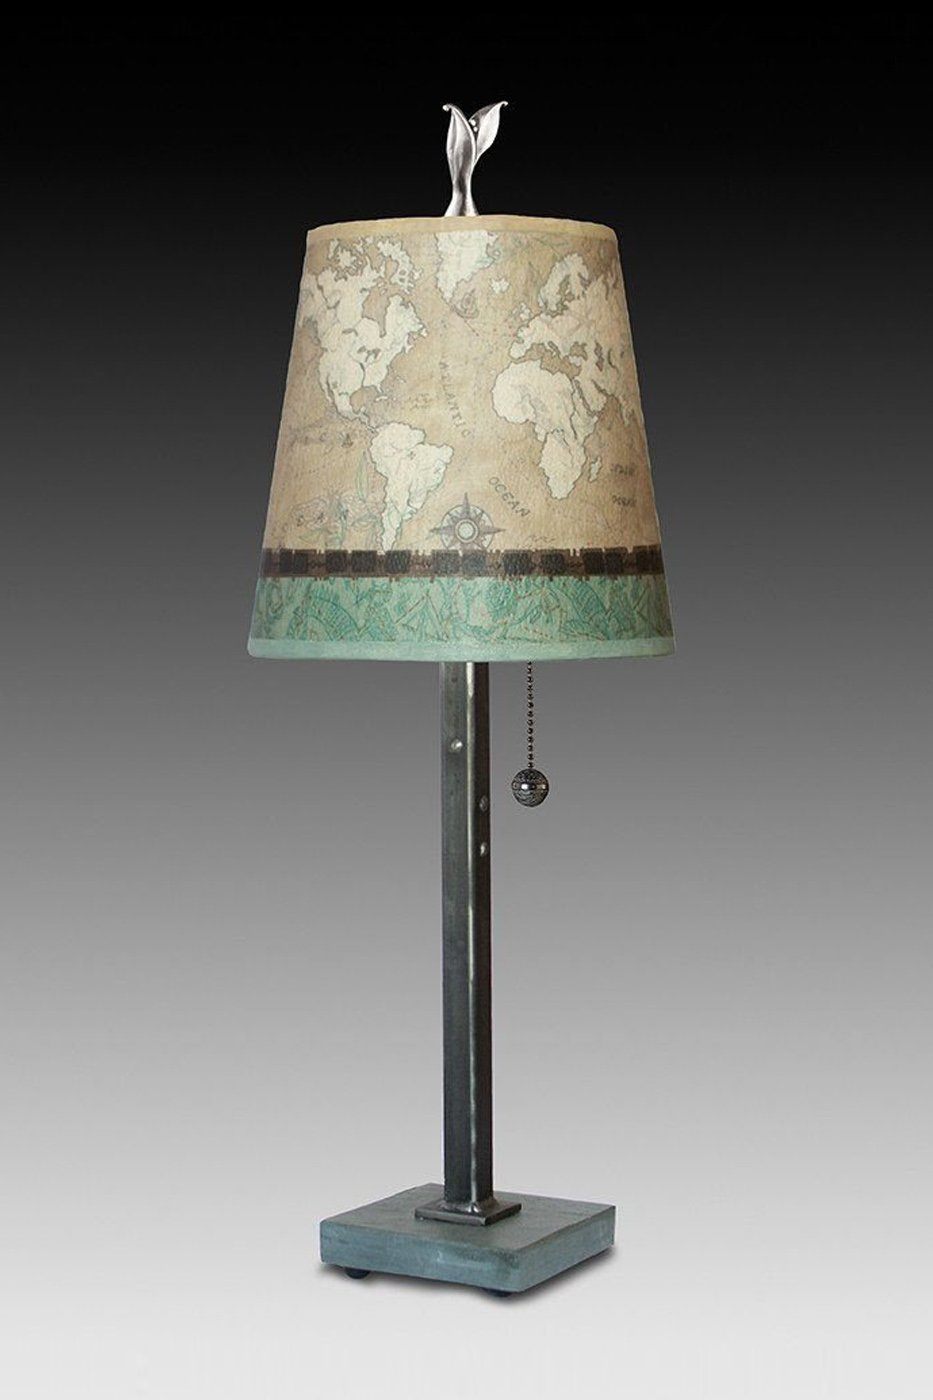 Steel Table Lamp with Small Drum Shade in Voyages